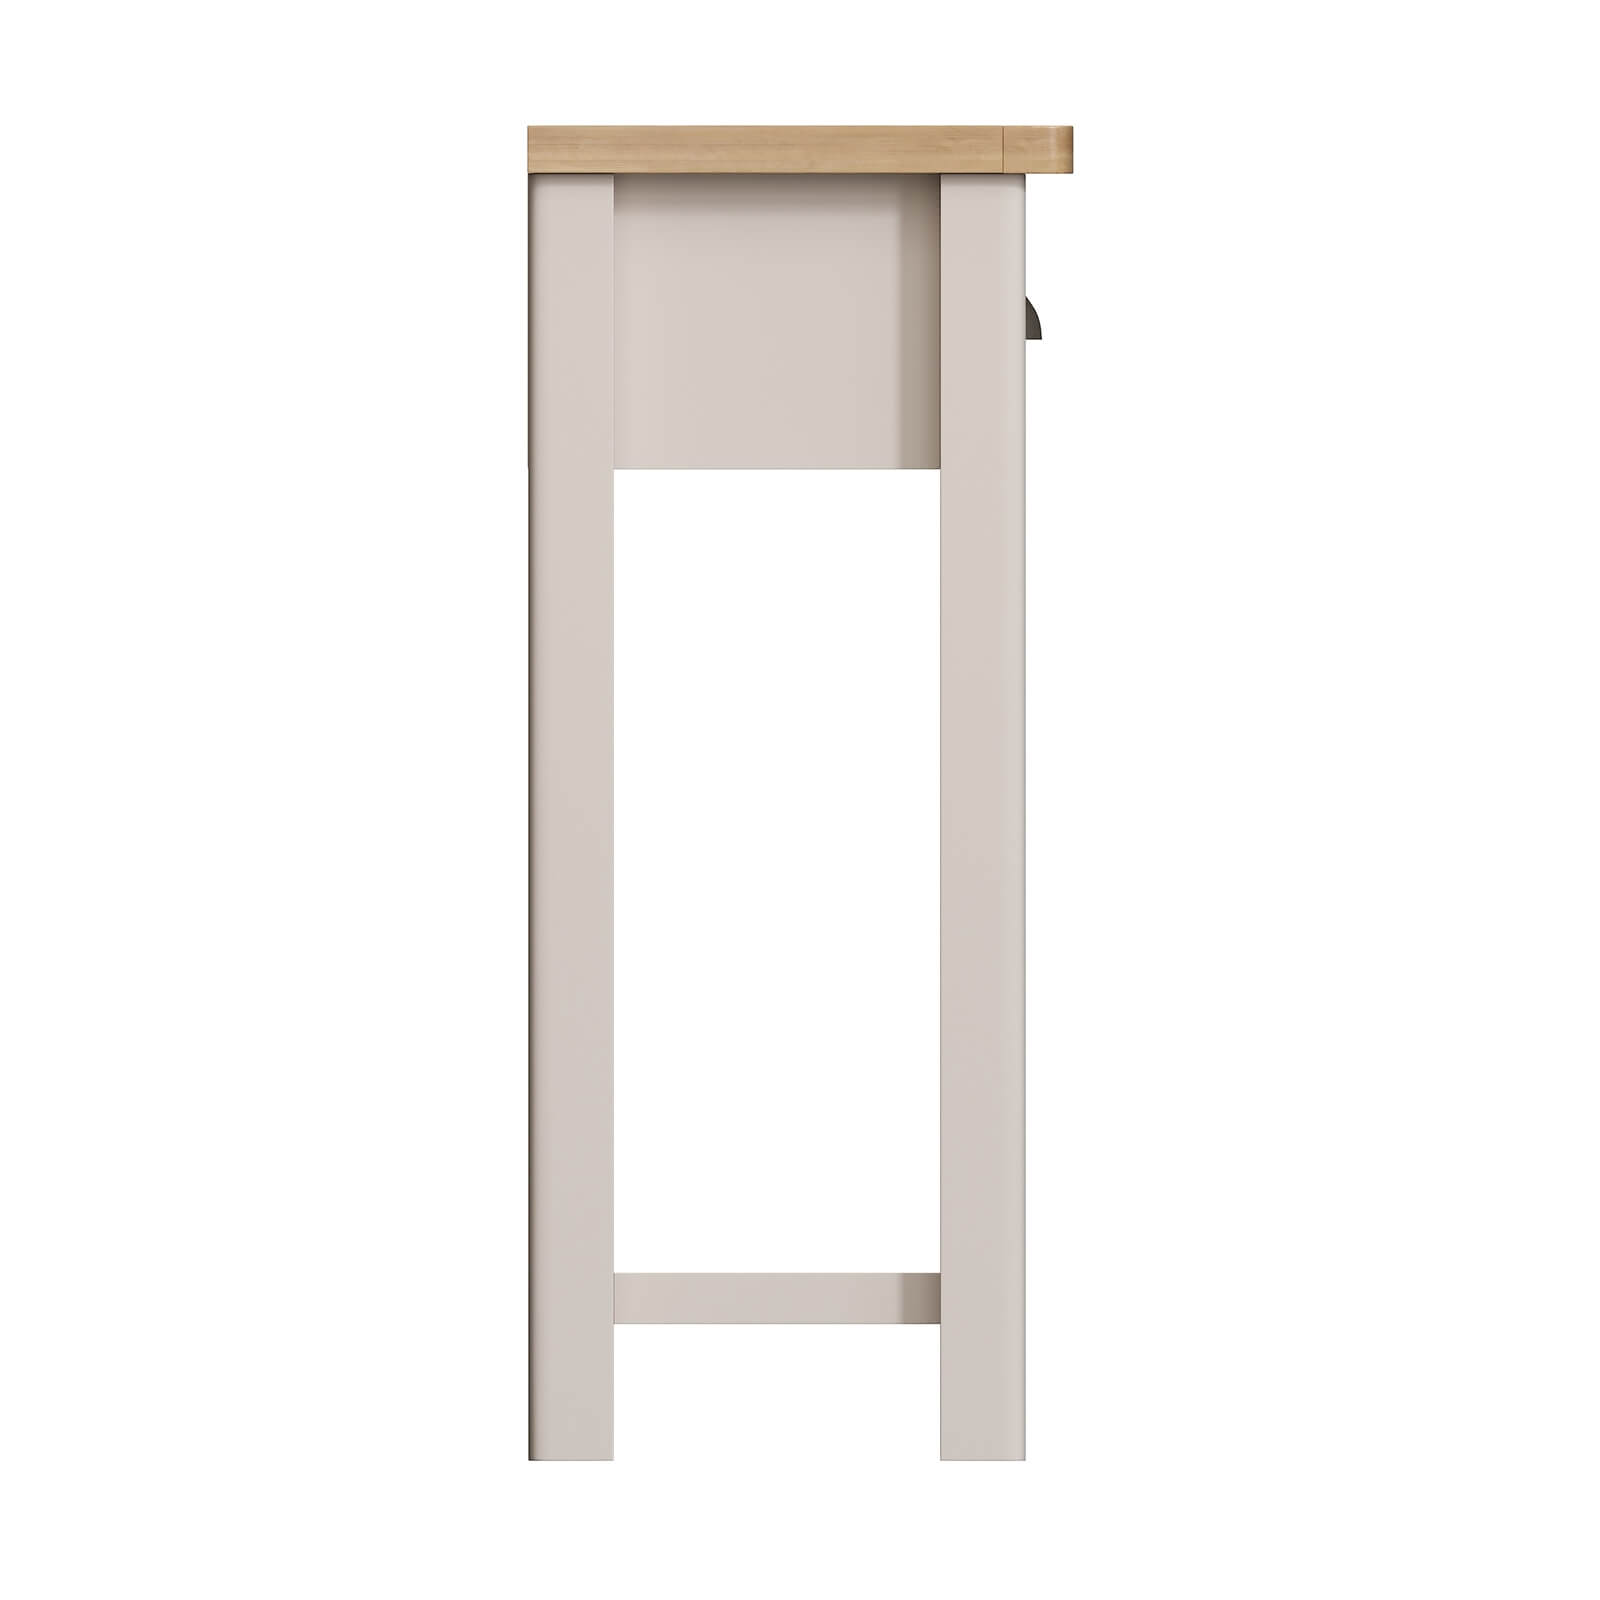 Padstow Console Table - Truffle